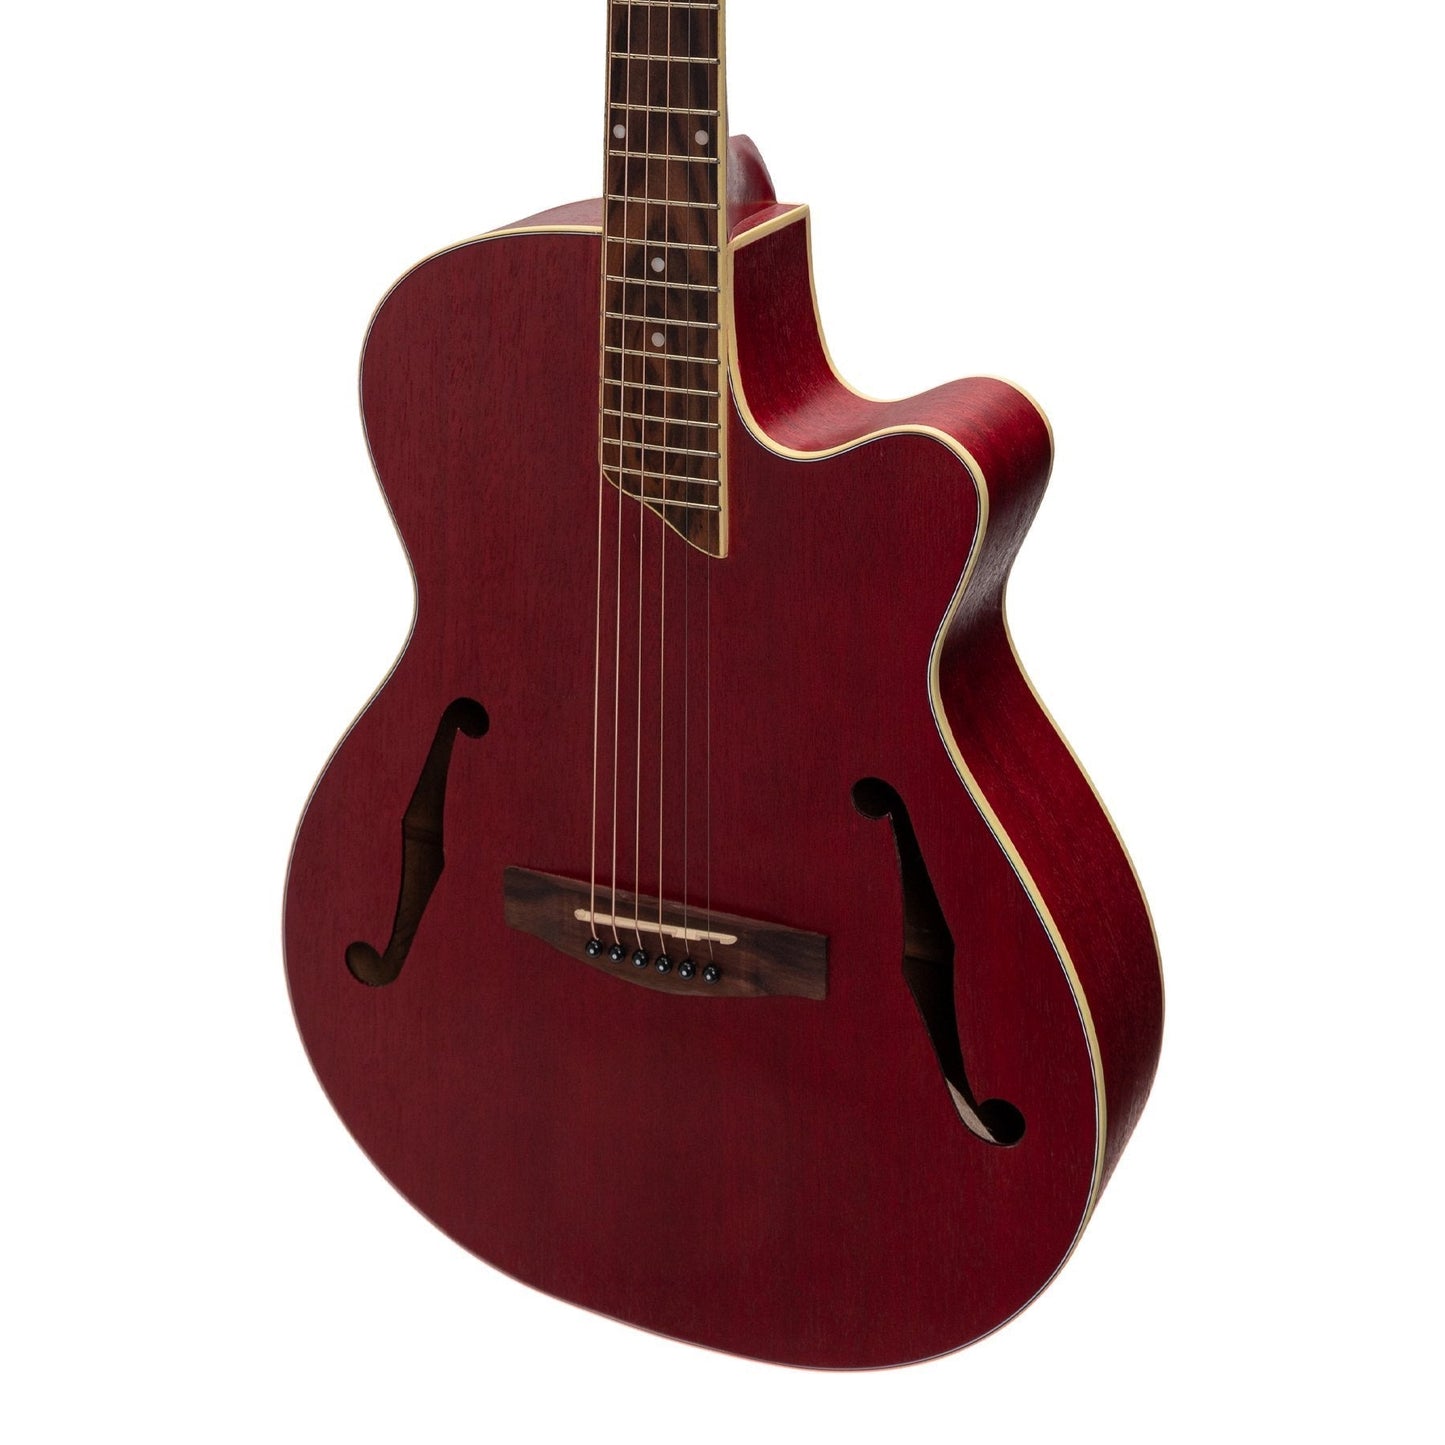 Load image into Gallery viewer, Martinez Jazz Hybrid Acoustic-Electric Small Body Cutaway Guitar (Red)
